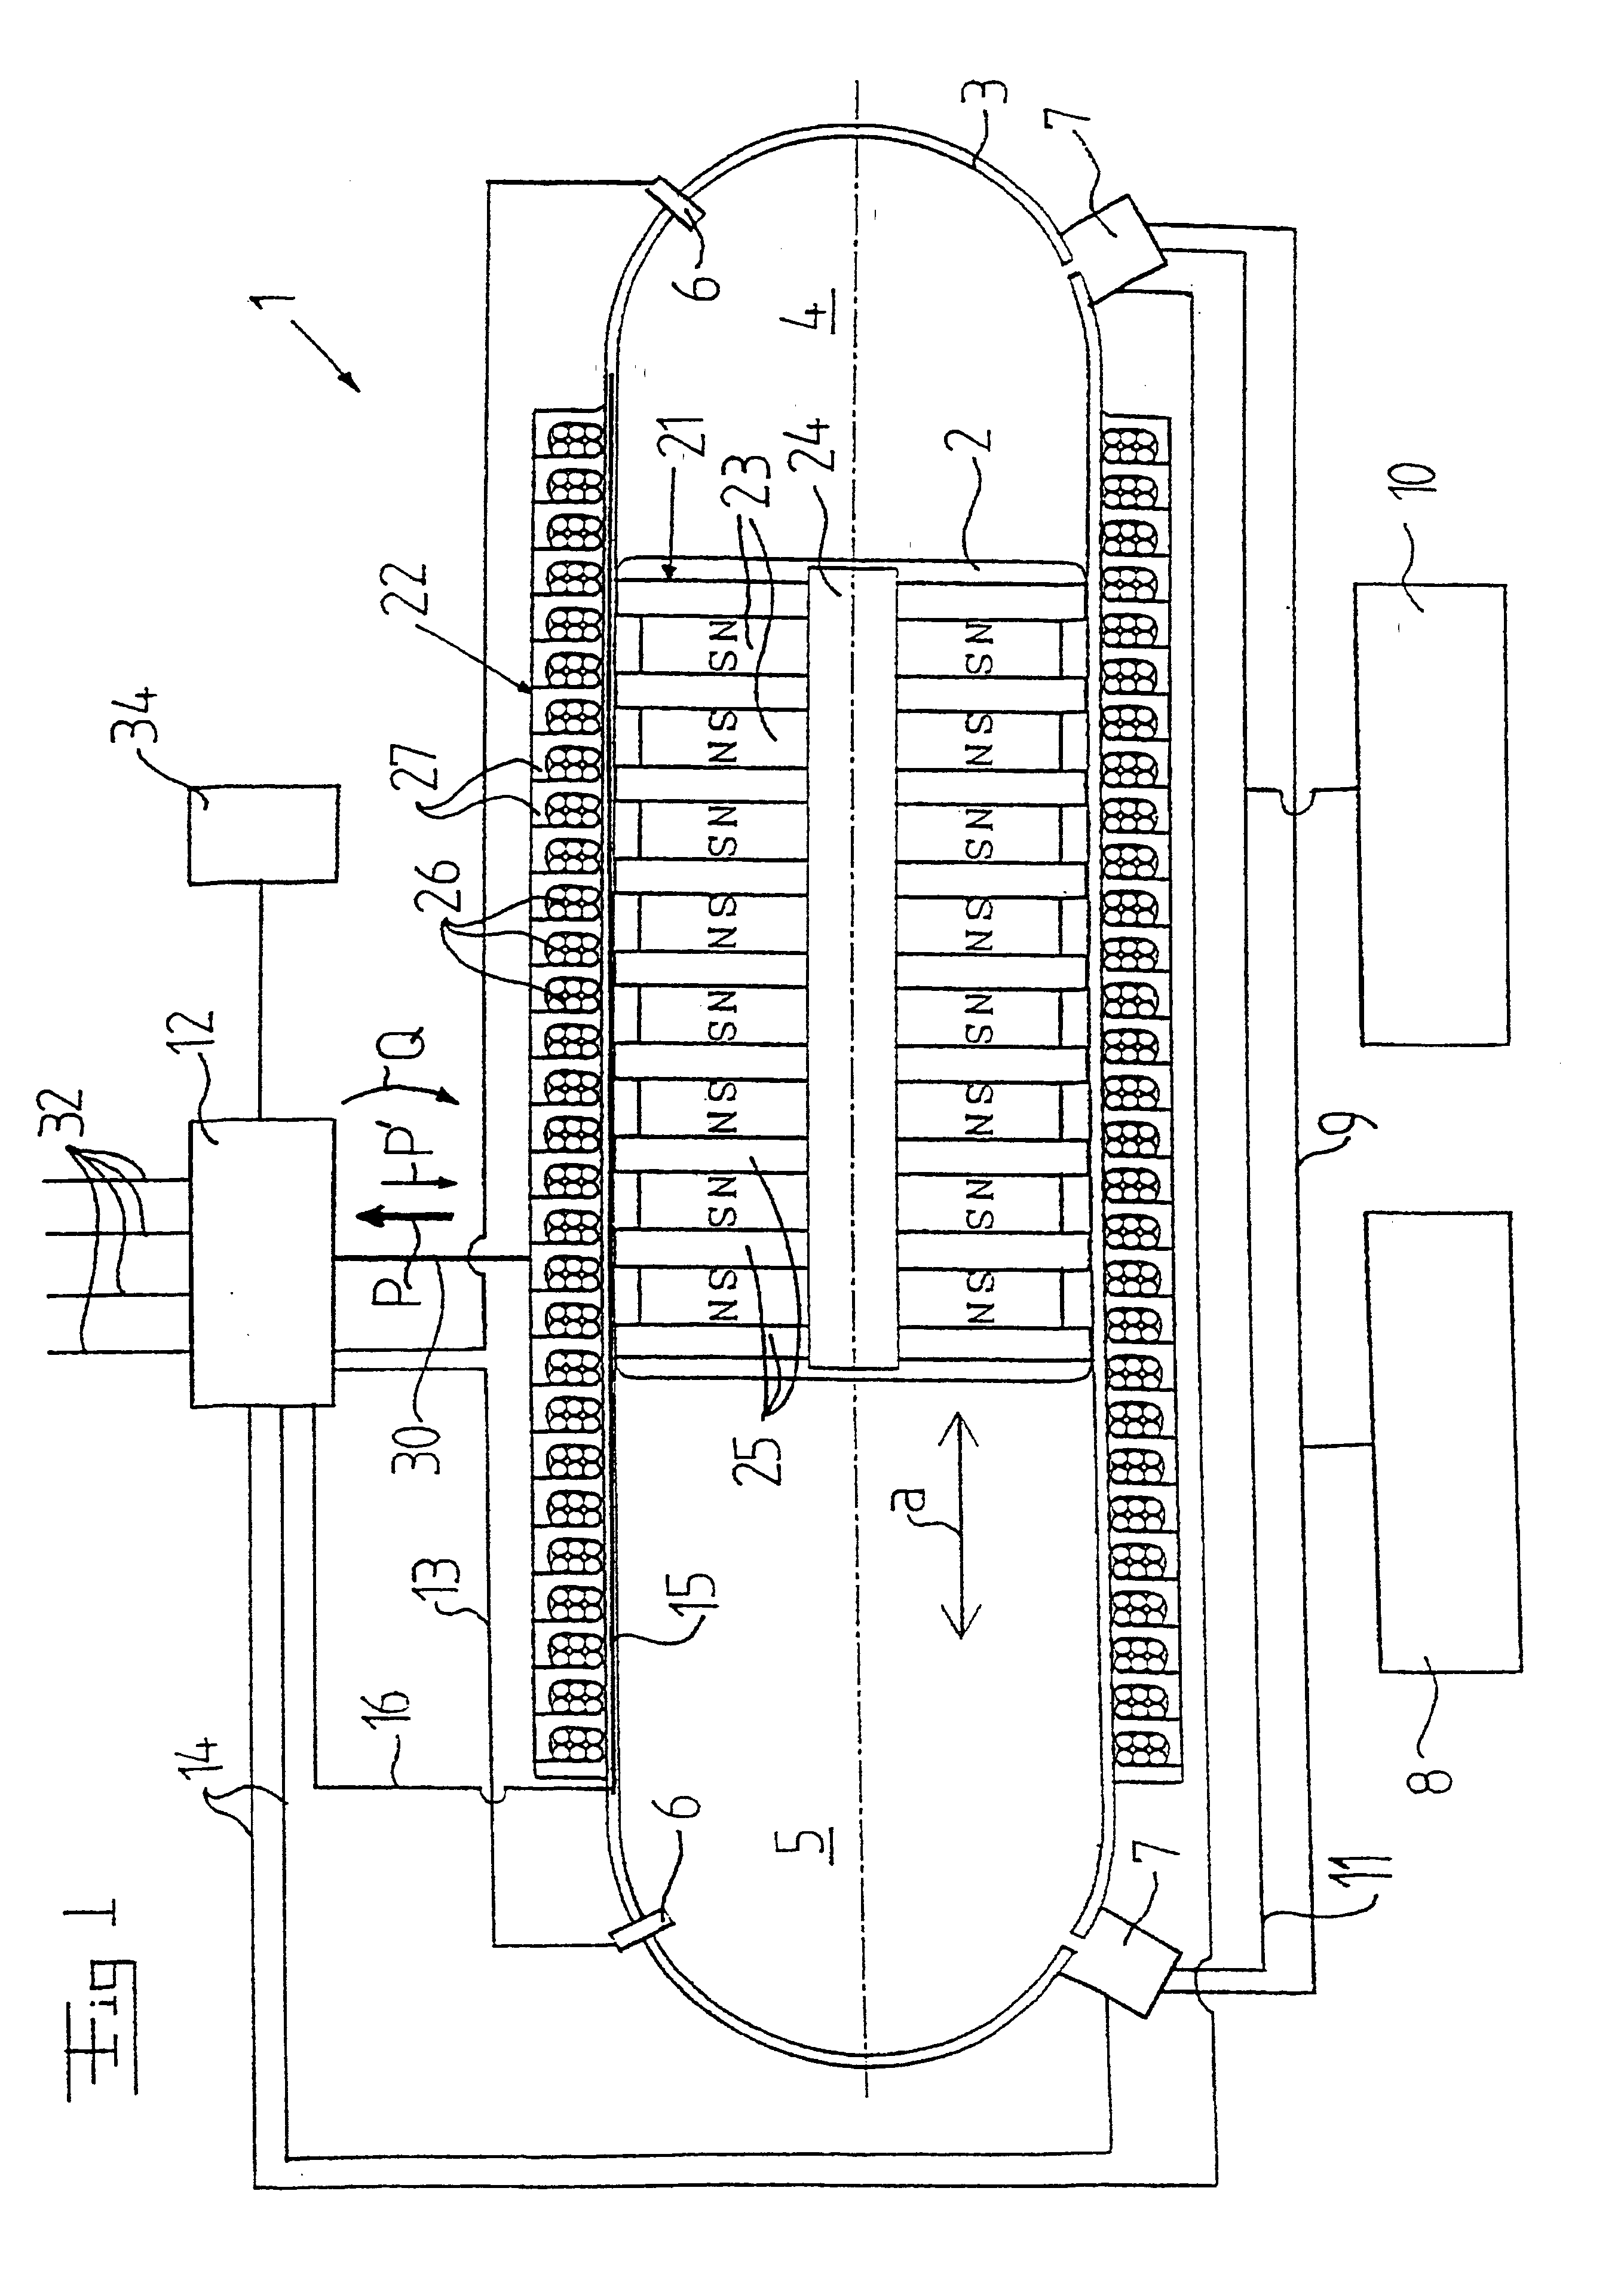 Device including a combustion engine, a use of the device, and a vehicle